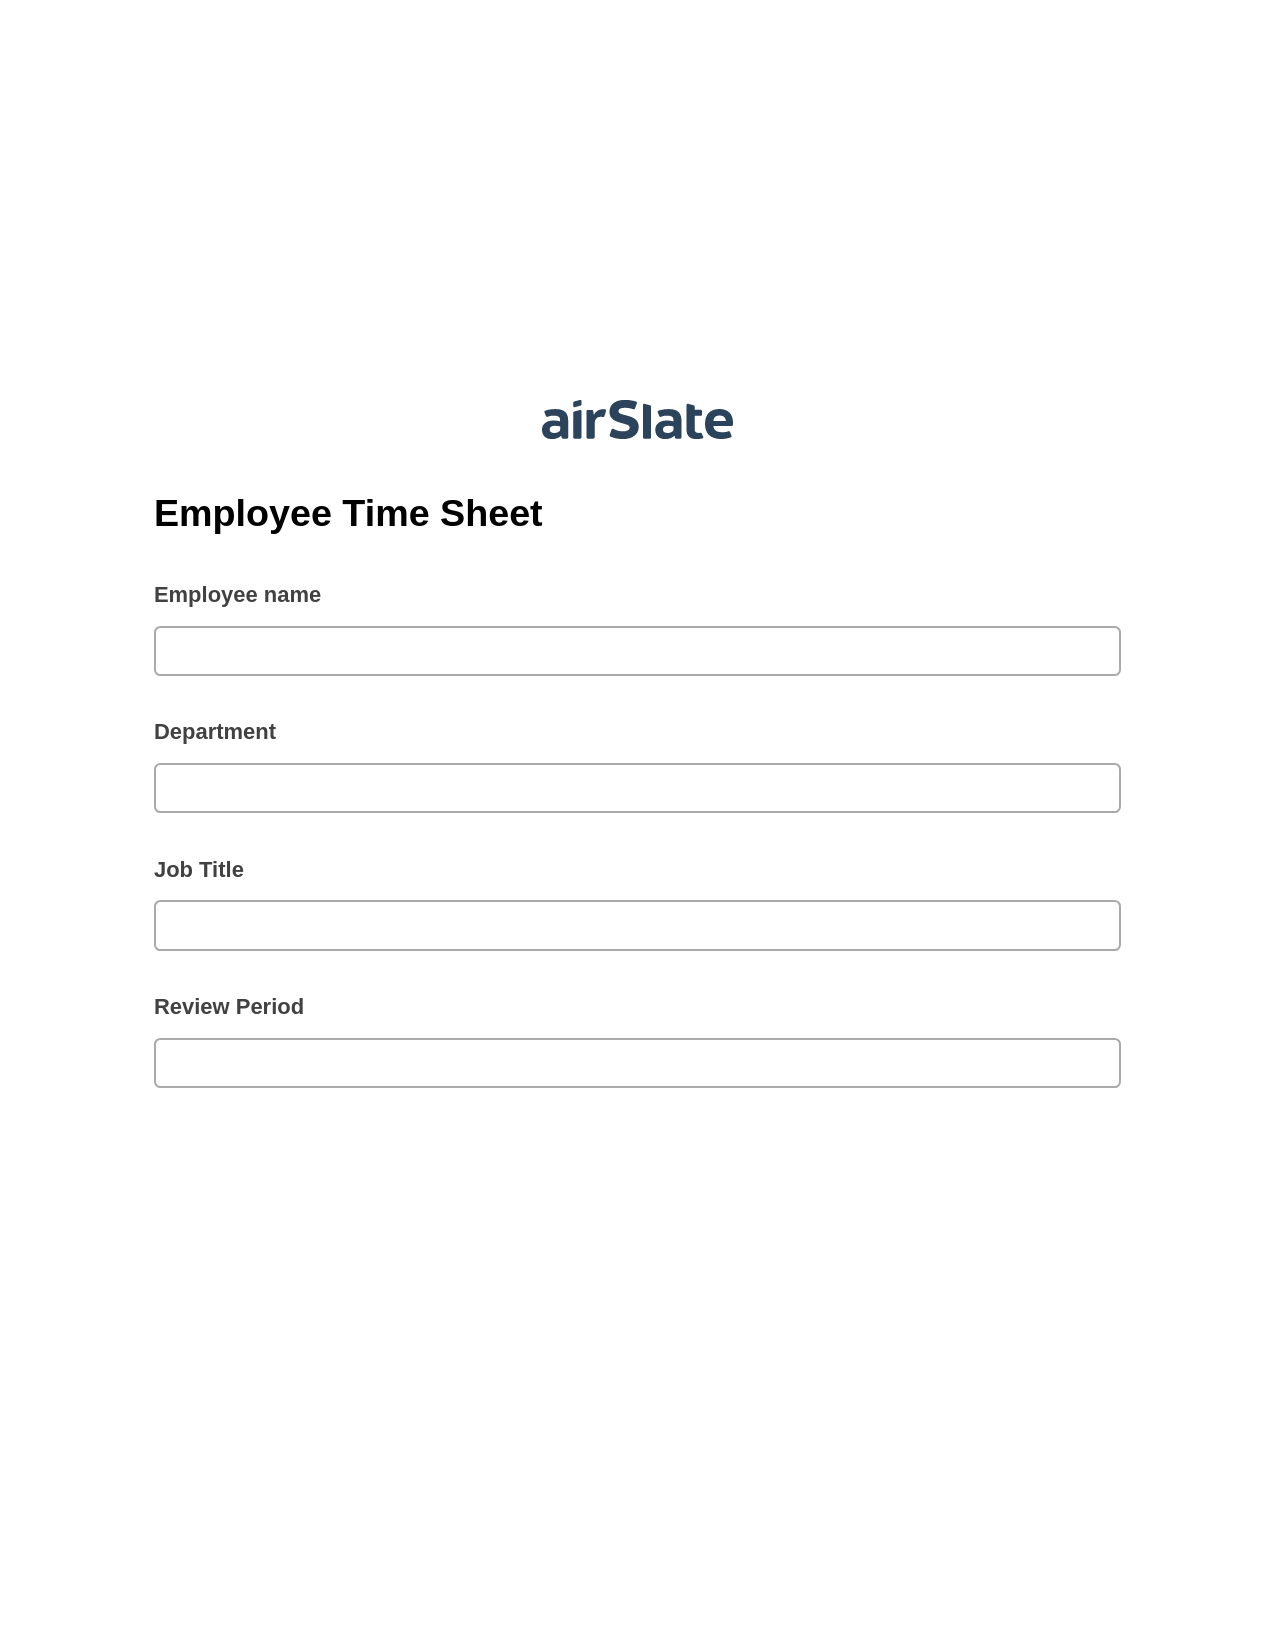 Employee Time Sheet Pre-fill from Litmos bot, Update Audit Trail Bot, Archive to OneDrive Bot